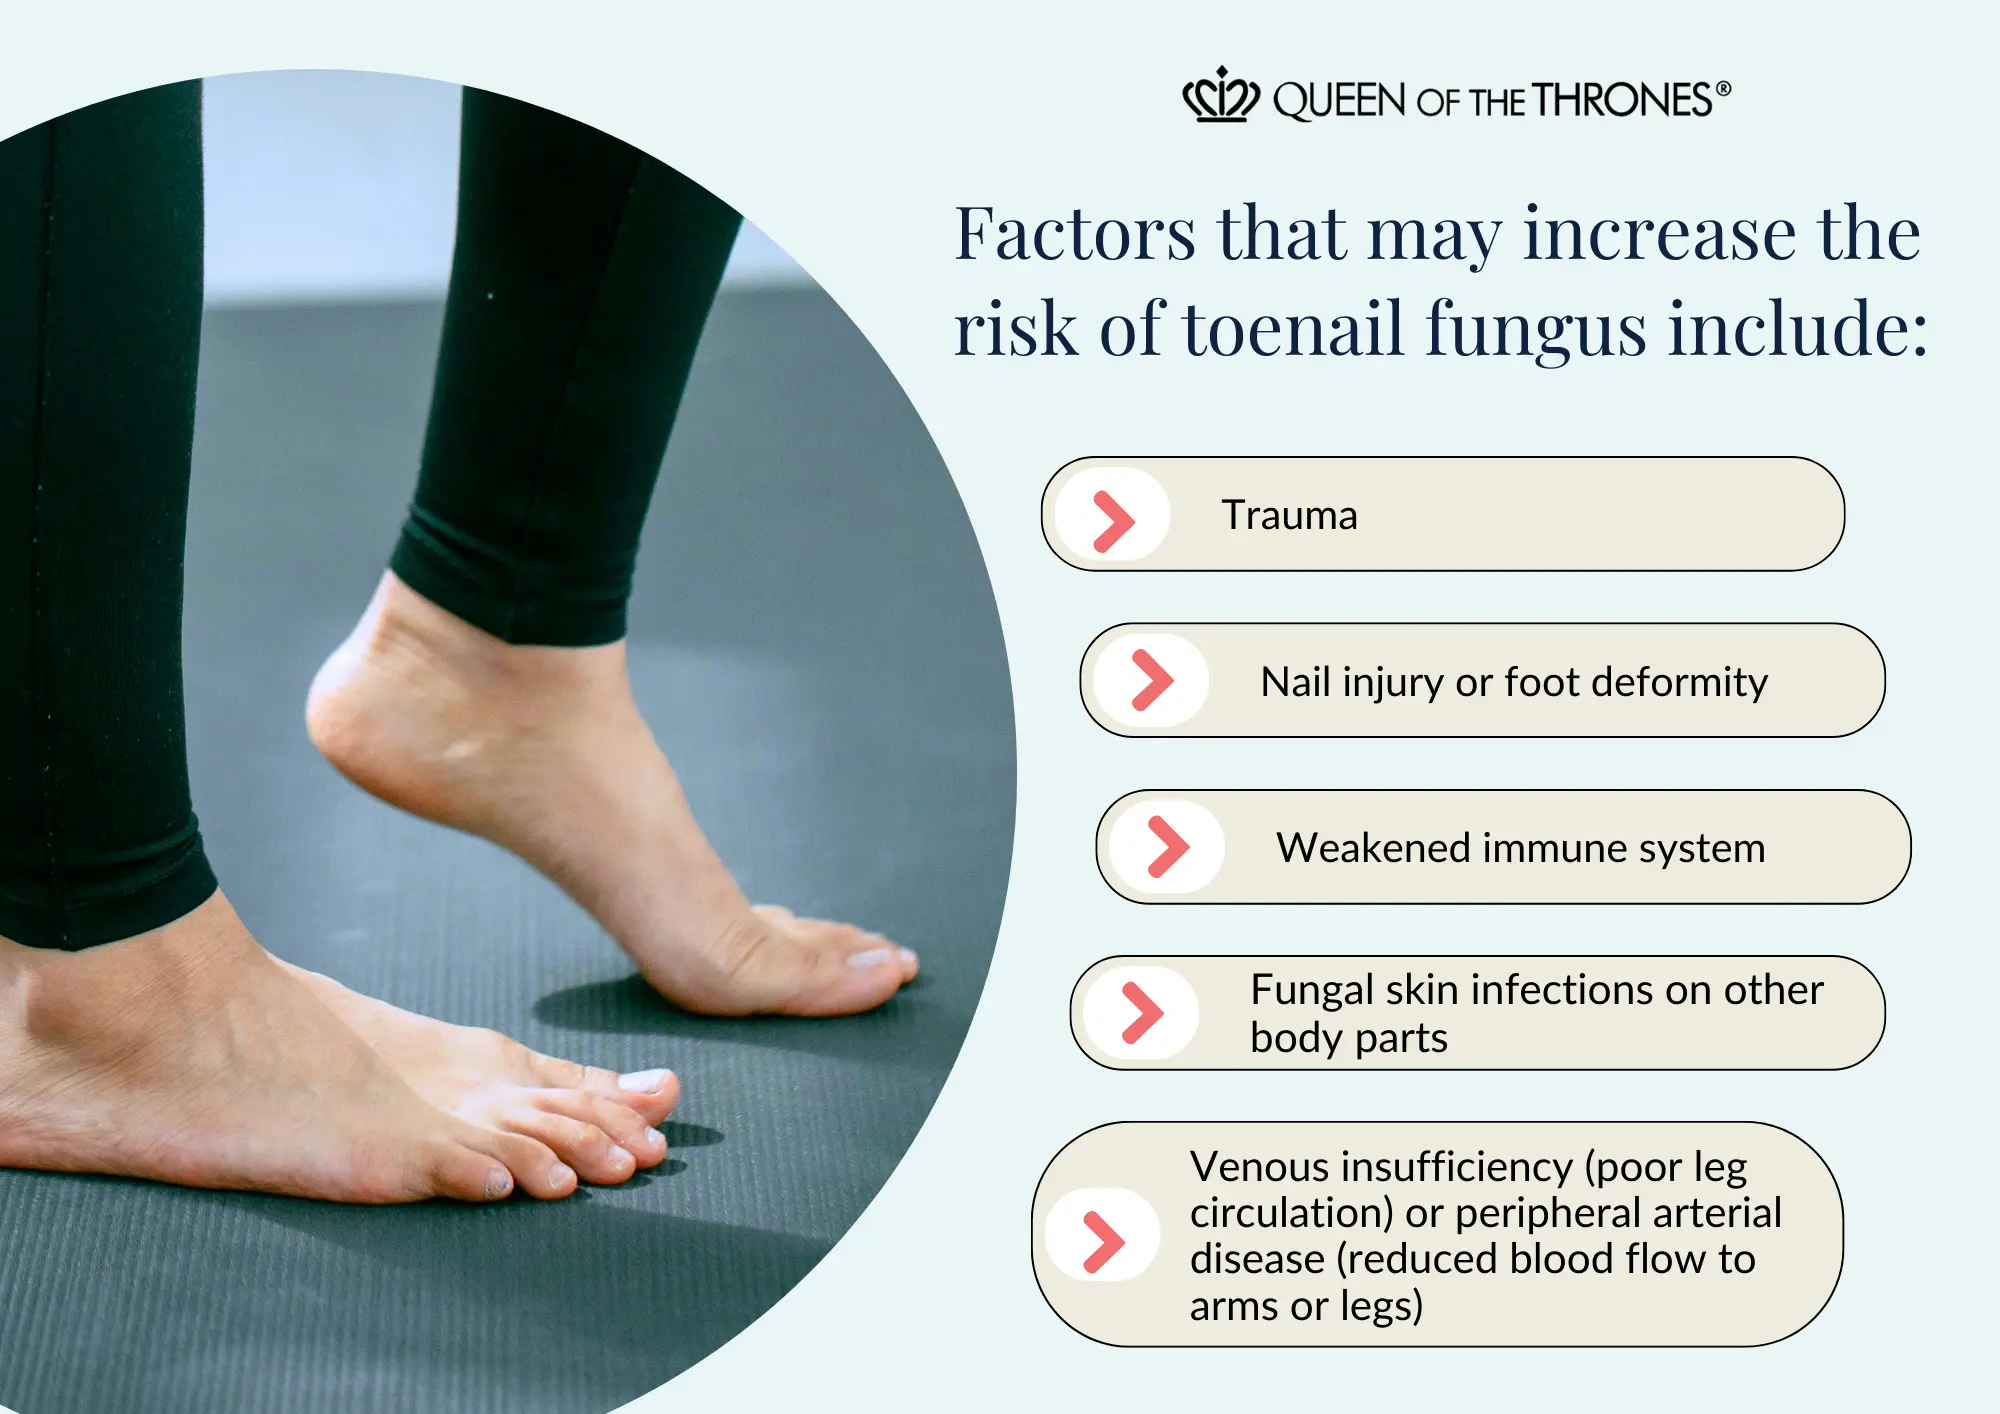 Factors that may increase risks of toe nail fungus by Queen of the Thrones